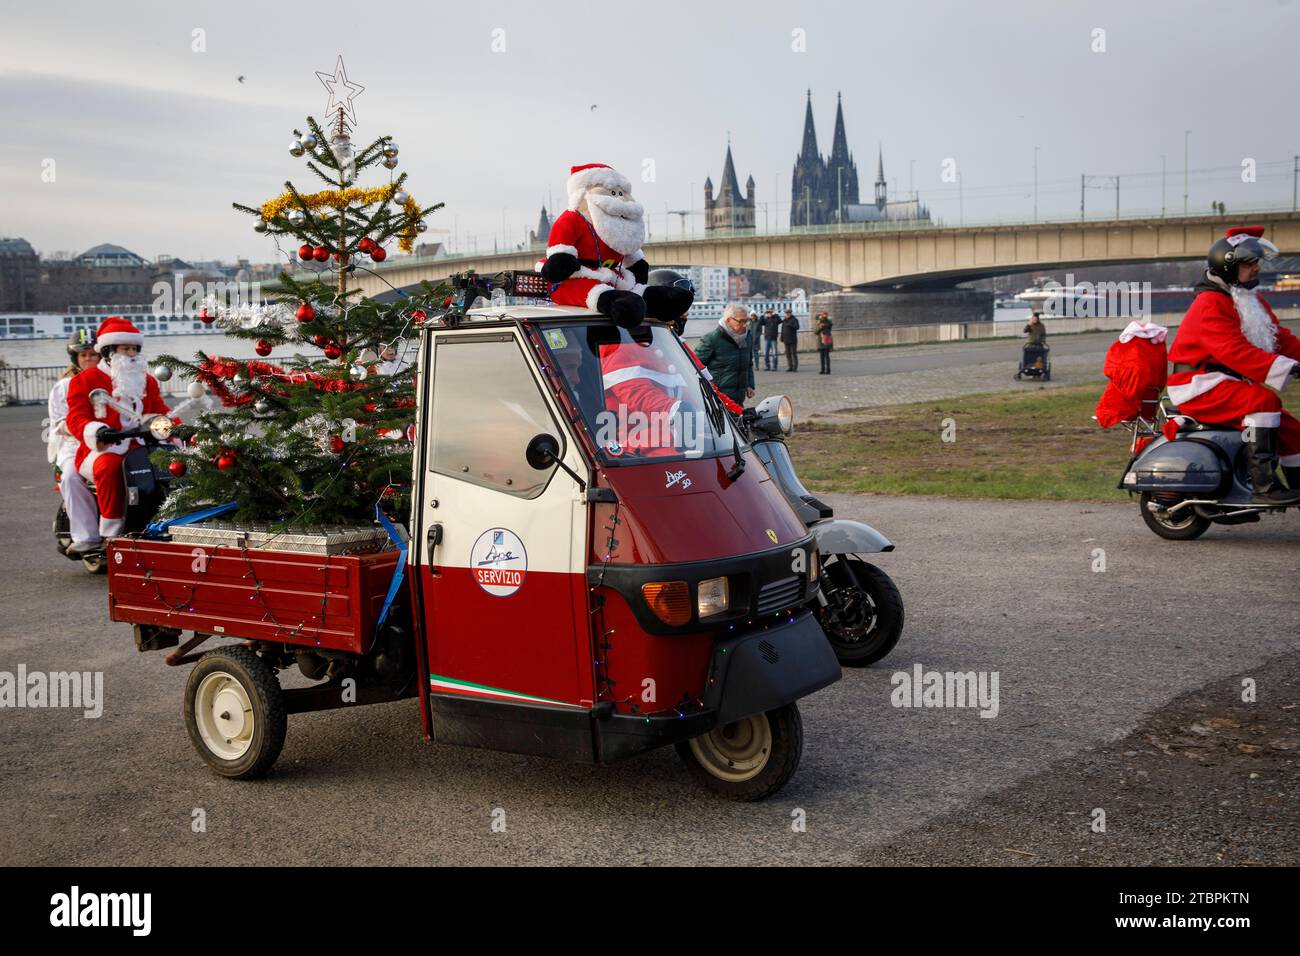 Piaggio Ape with Christmas tree, members of the Vespa scooter club RheinSchalter Koeln dressed as Santas gather on Deutzer Werft before a ride through Stock Photo